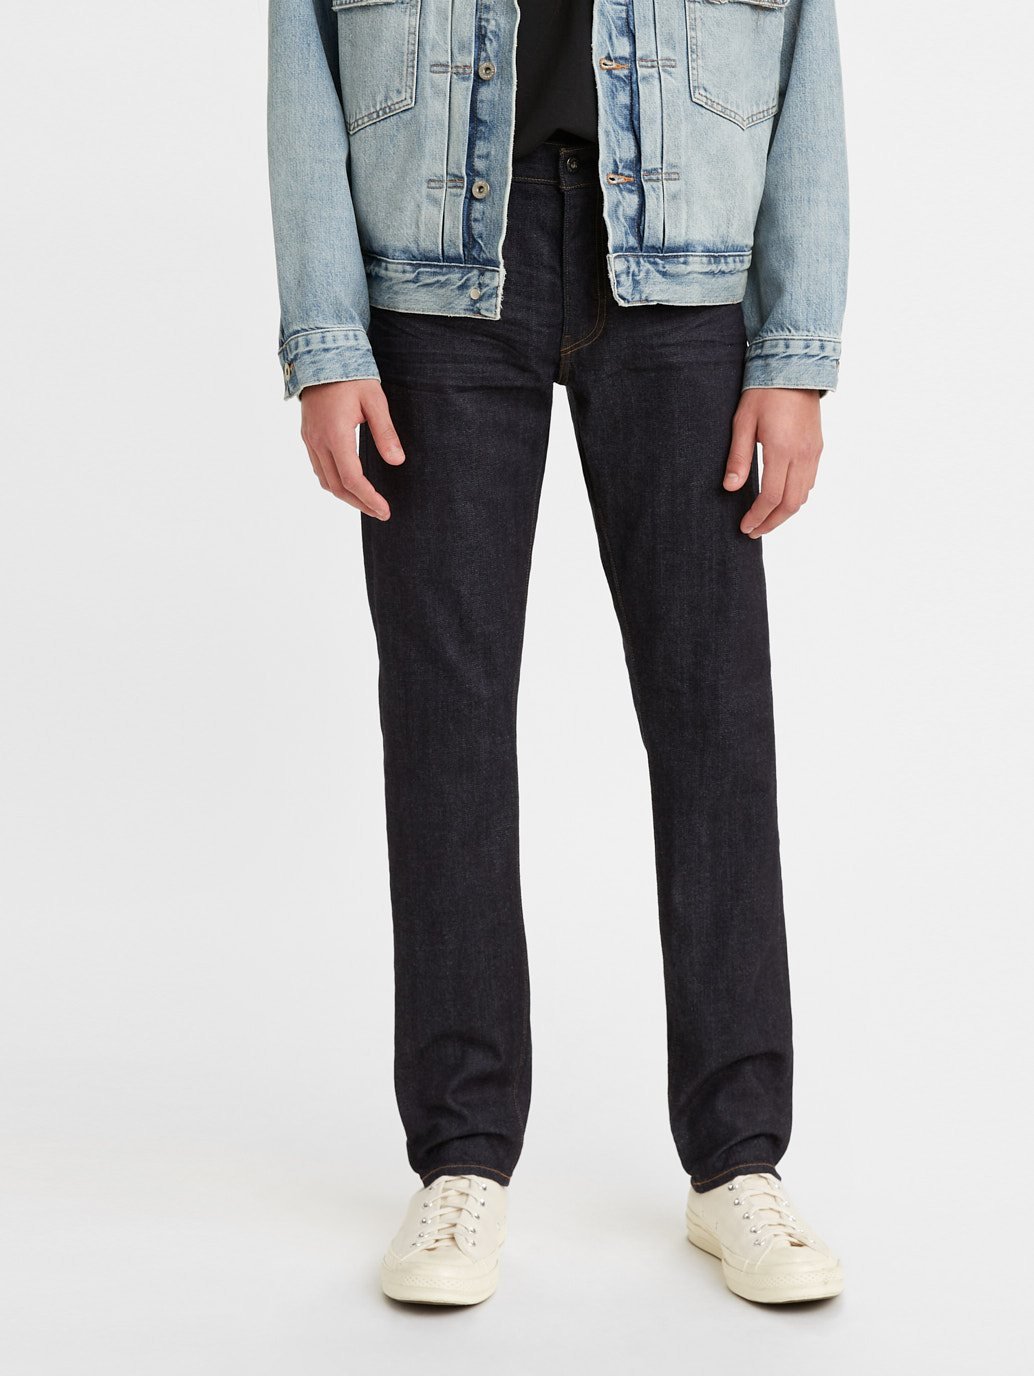 LEVI'S MADE \u0026 CRAFTED MADE IN JAPAN 511